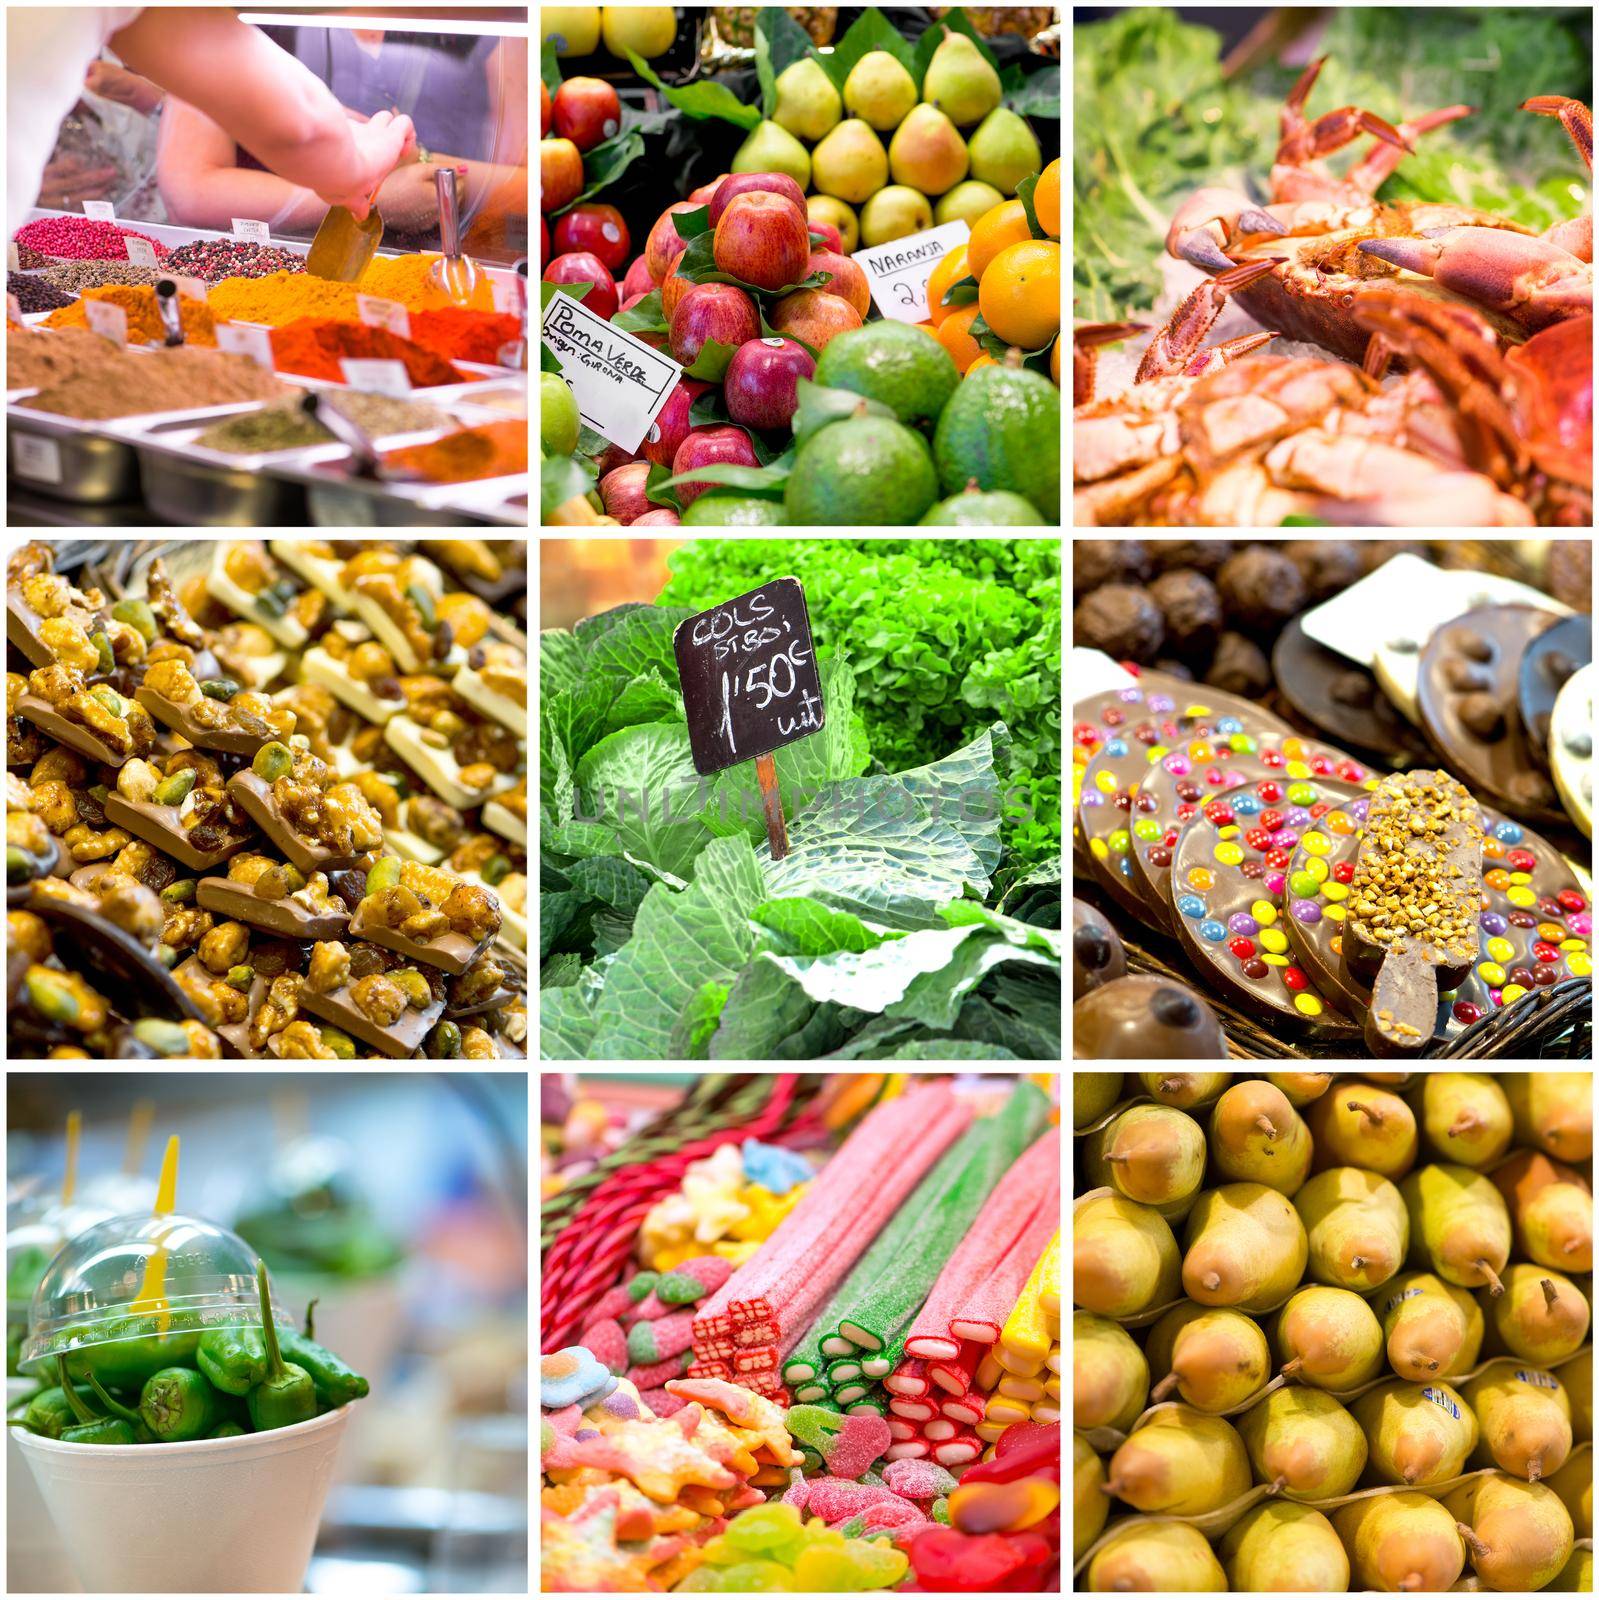 collage of photos from the market by tan4ikk1